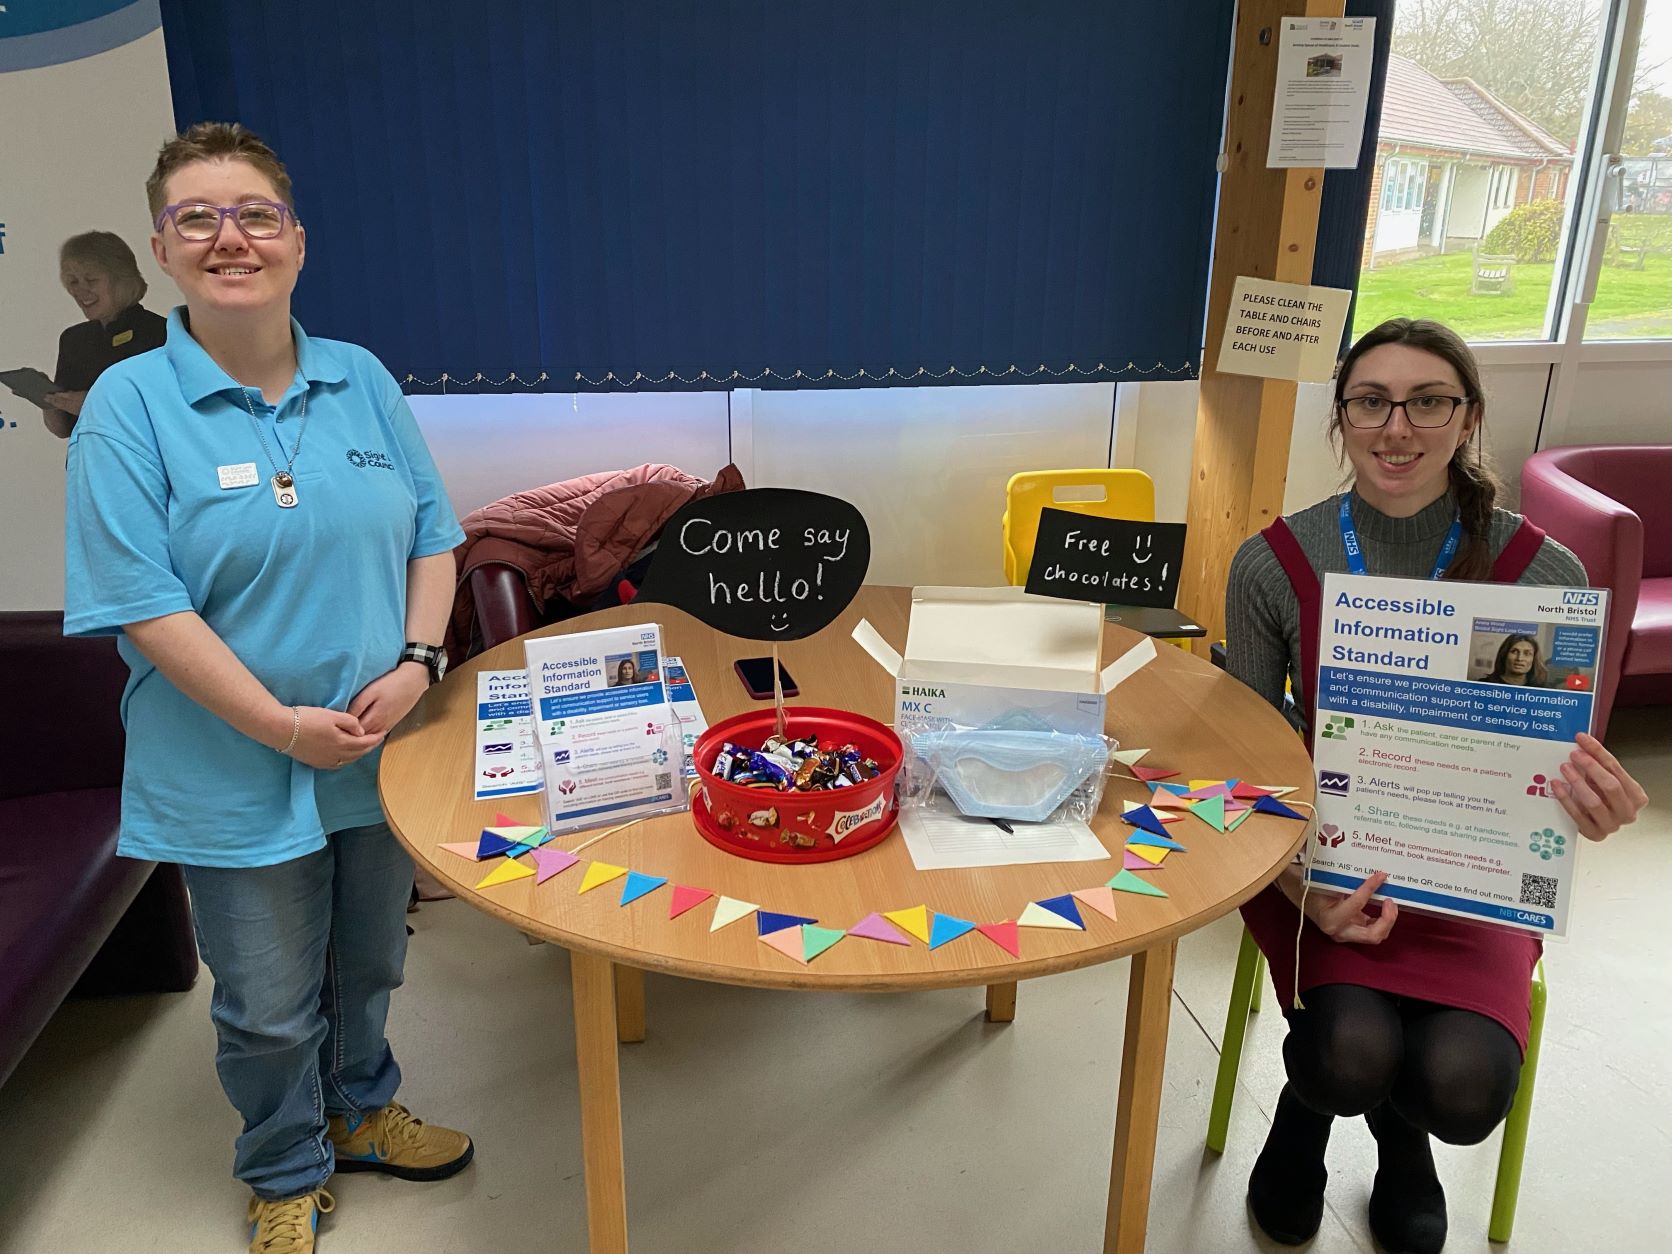 West of England SLC member, Emma, with North Bristol Trust staff member Rosie, at a table with information on AIS in NBT Maternity.